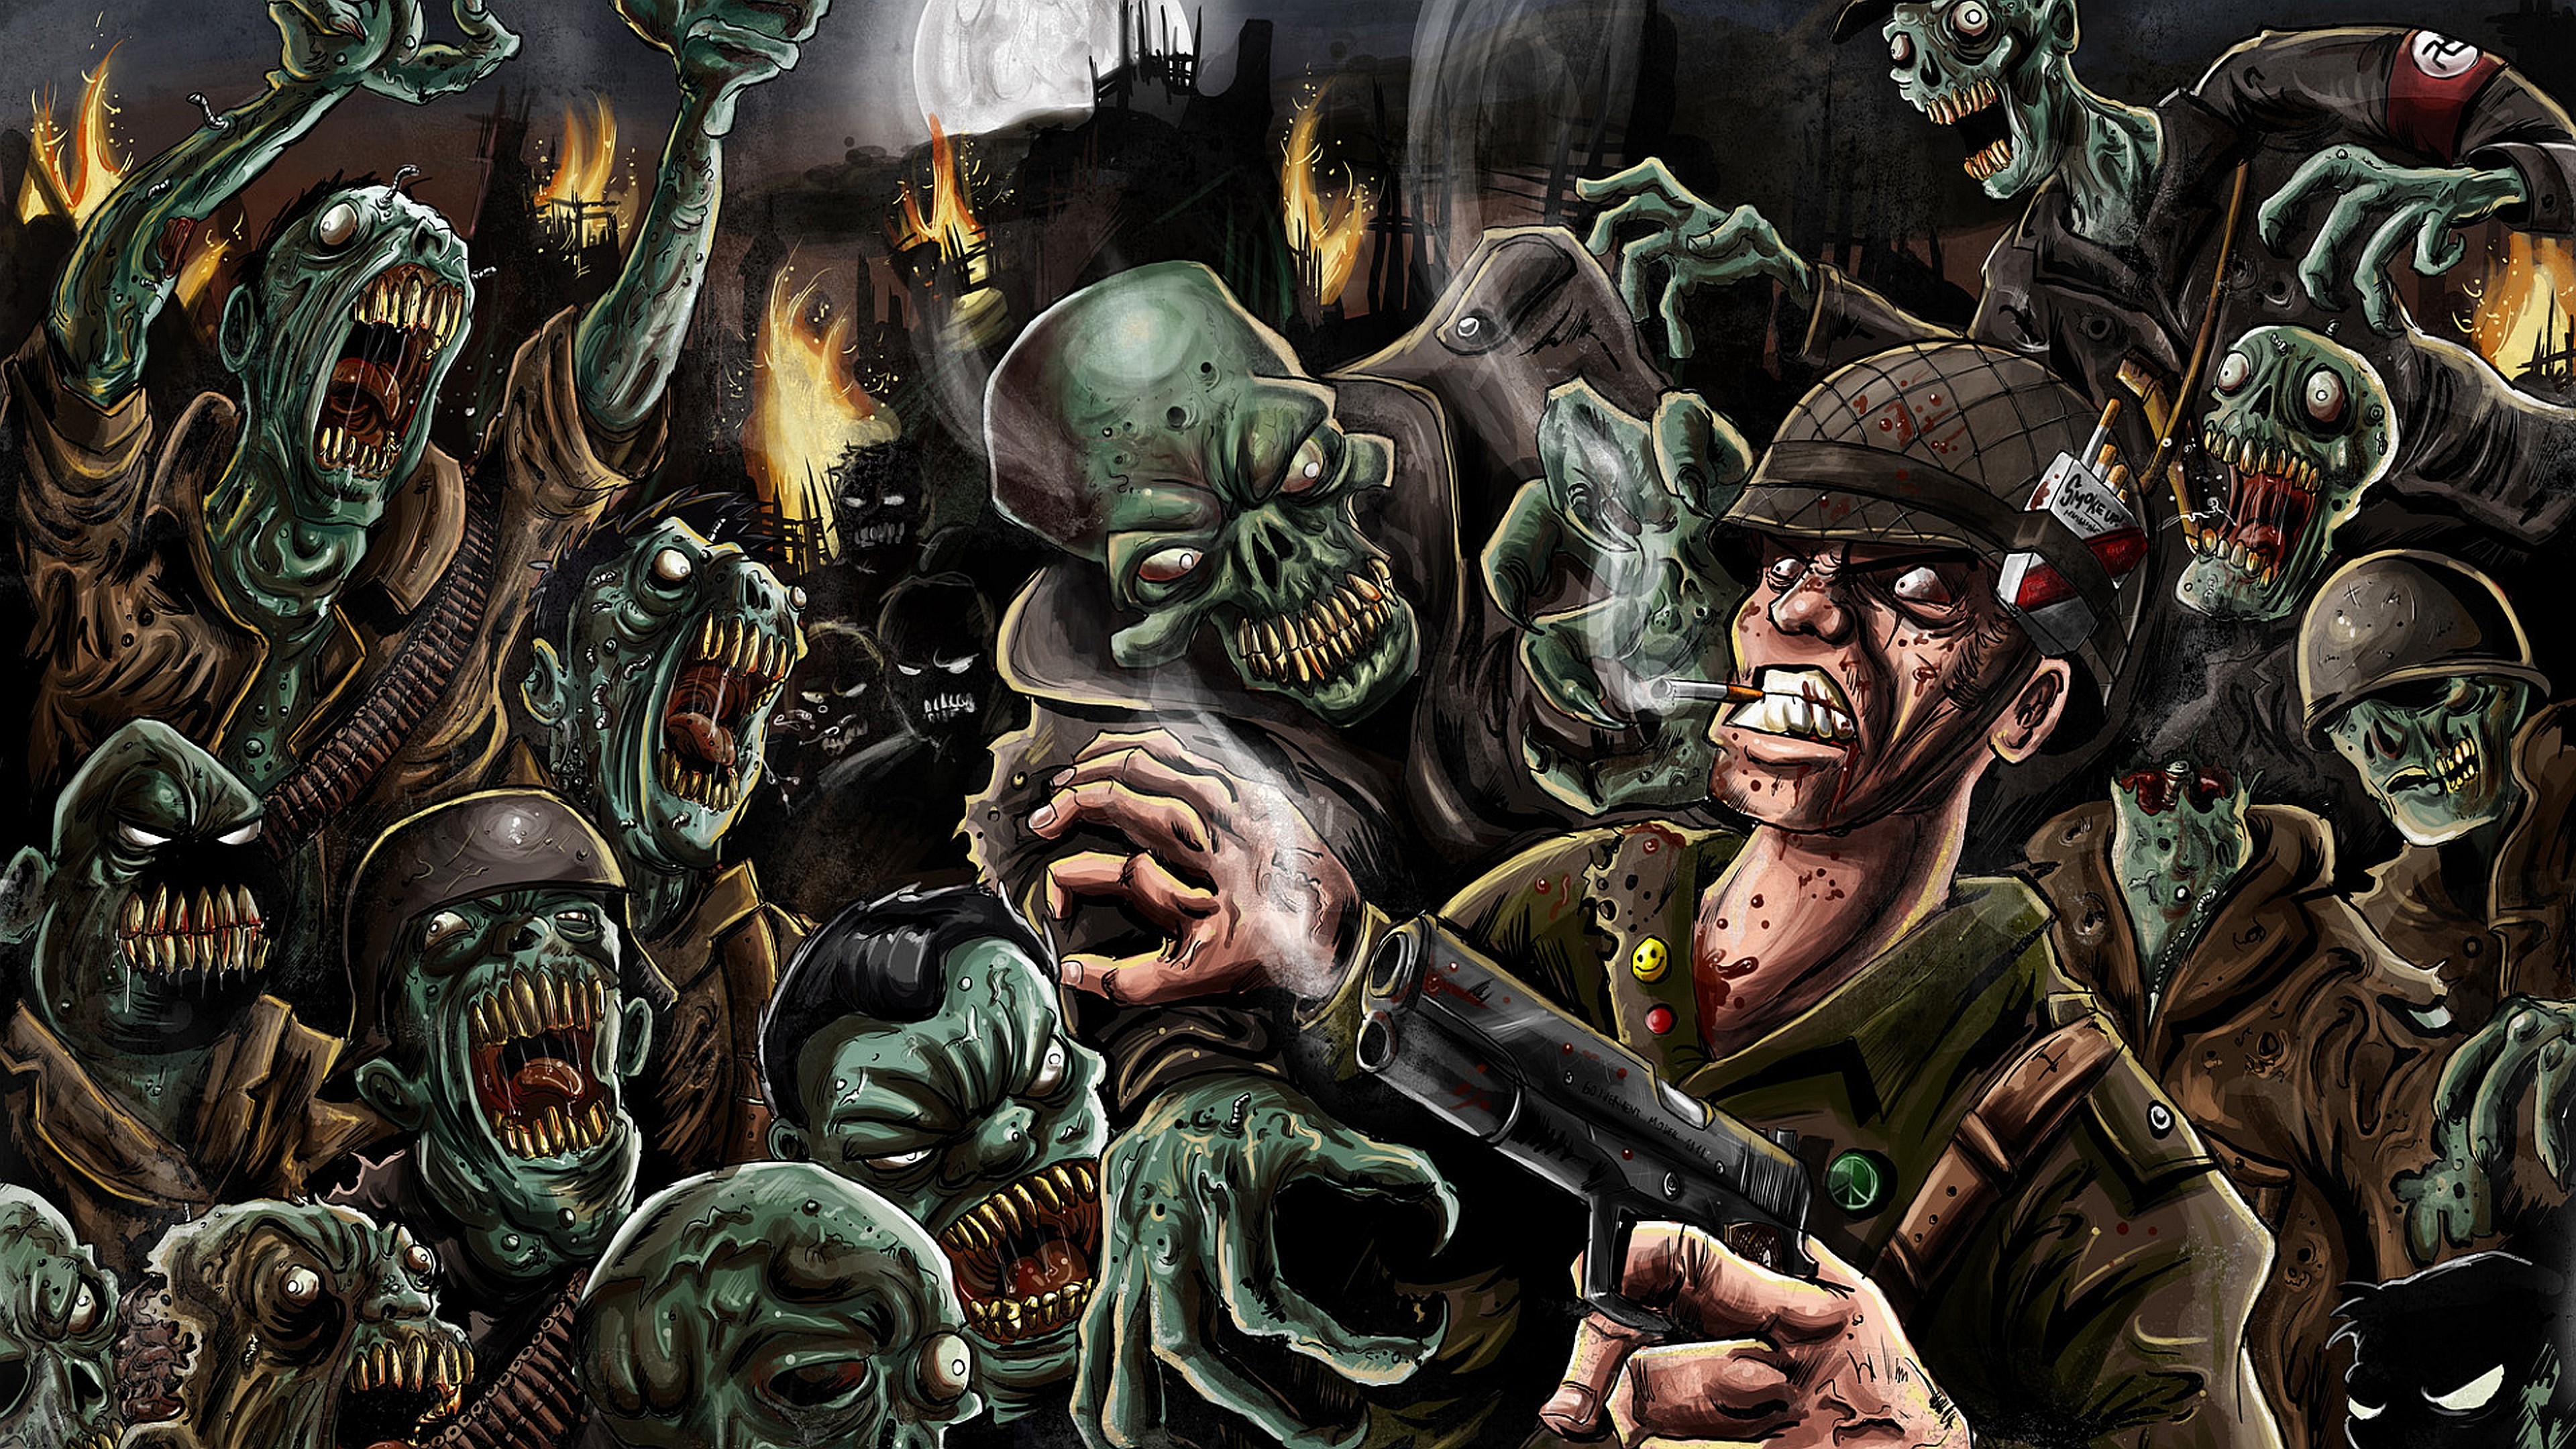 3840x2160 US soldier fighting nazi zombies cartoon wallpaper from Zombie wallpapers